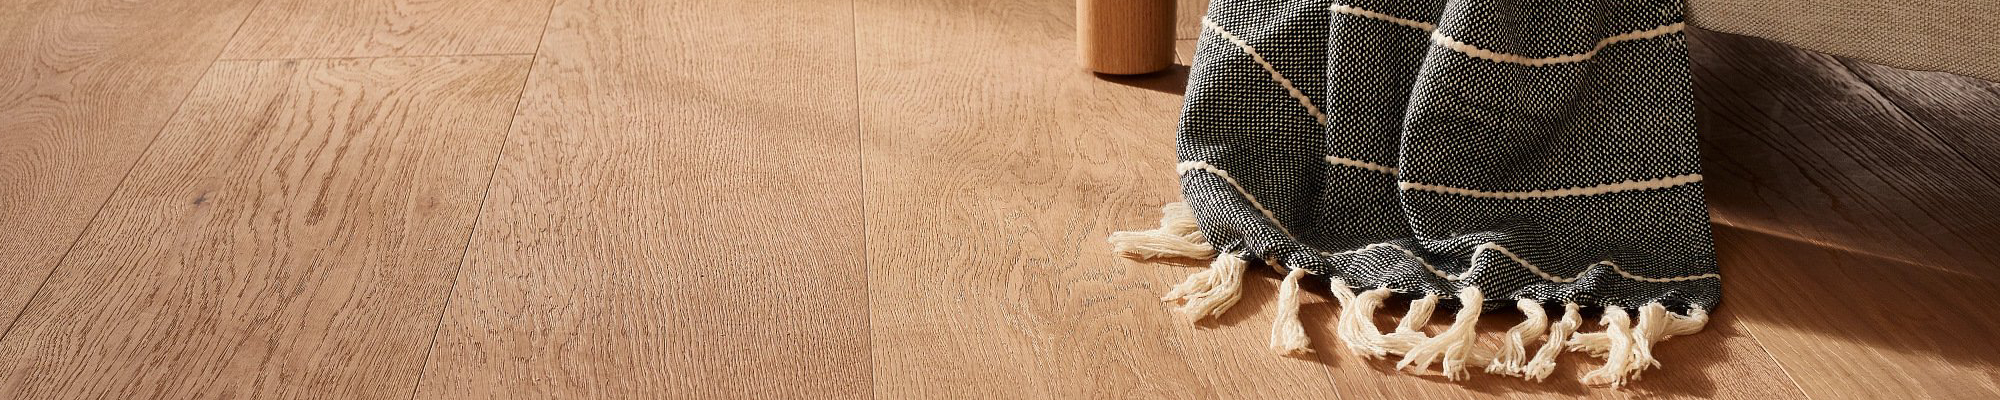 Hardwood floors by the experts at Solano Carpet | Fairfield  |  707.429.3350